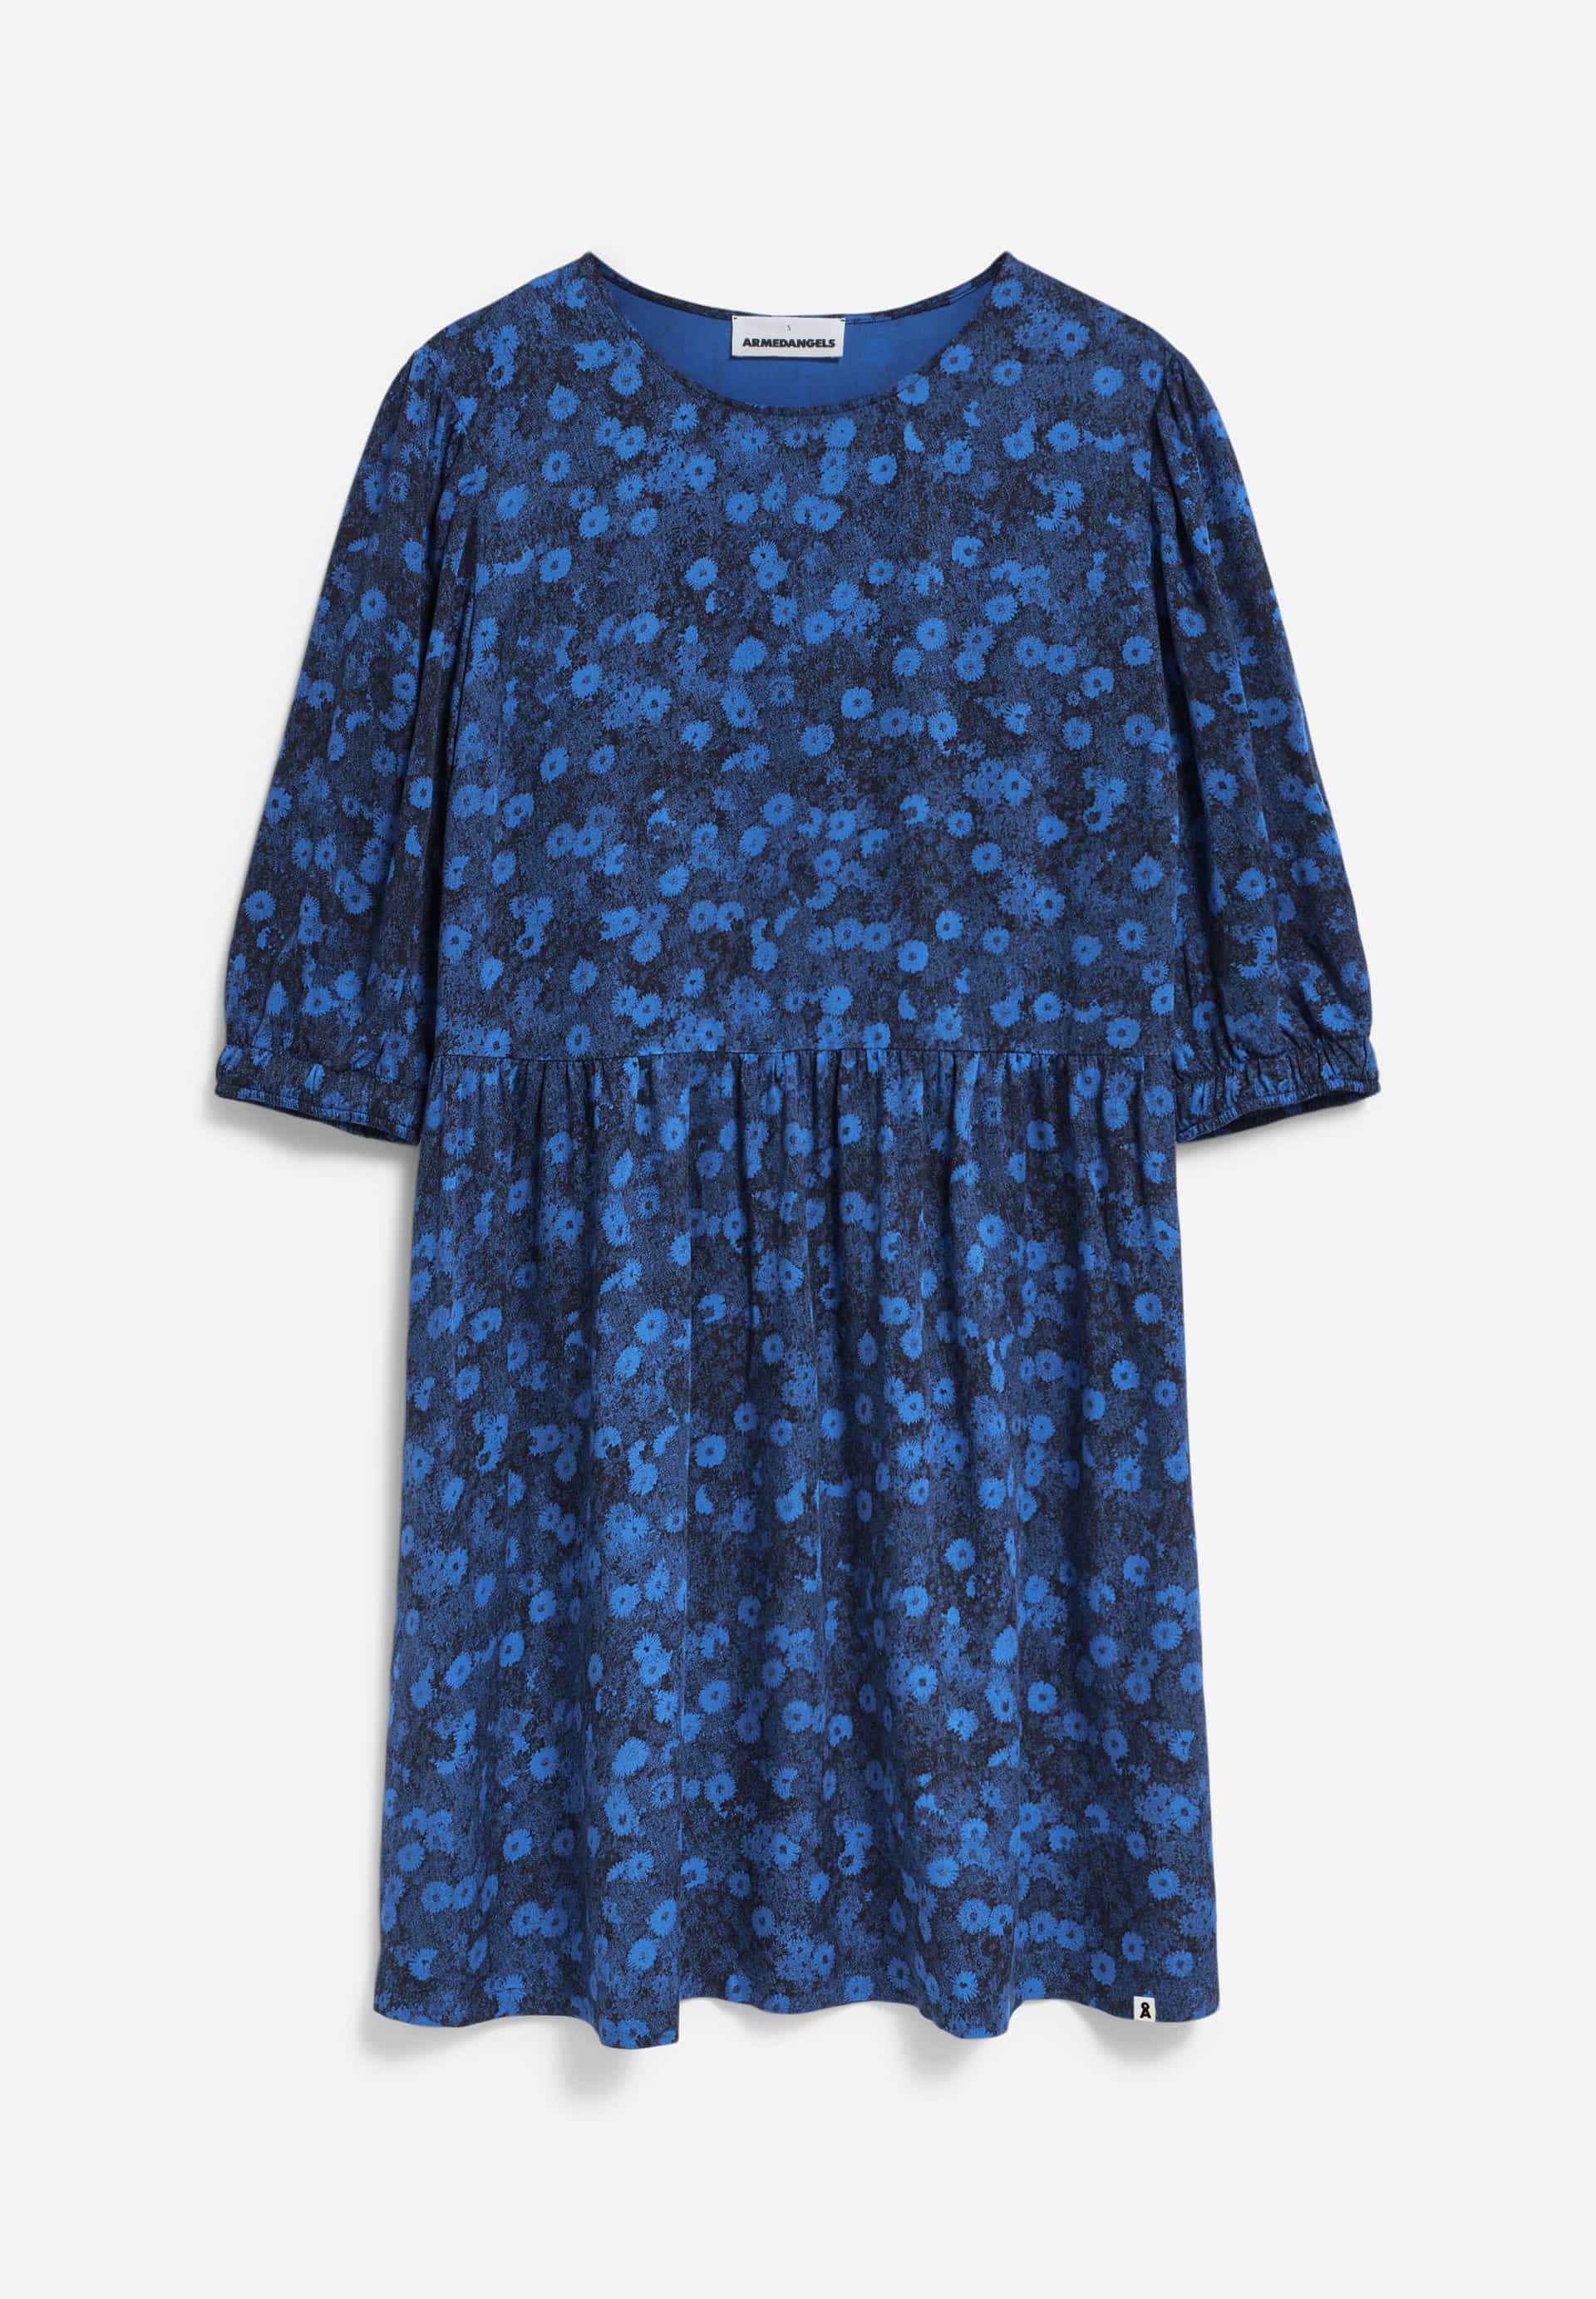 ROSEAA MILLES FLEURS Woven Dress Relaxed Fit made of LENZING™ ECOVERO™ Viscose